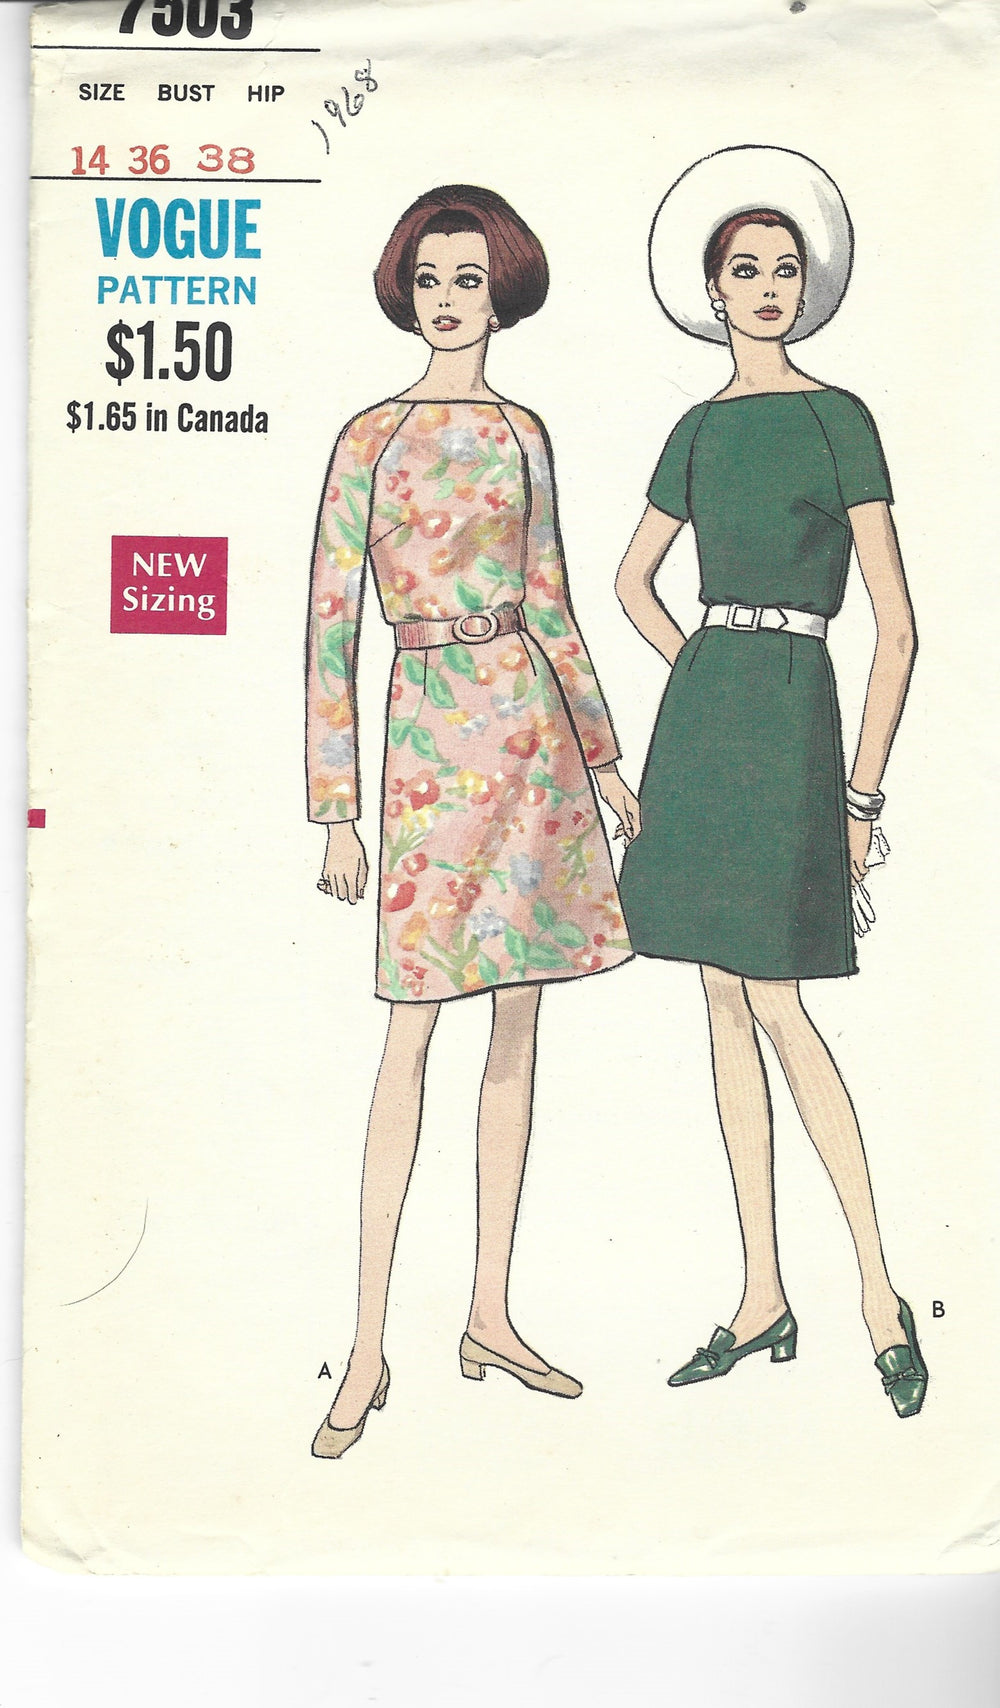 Vogue 7503  Ladies Back Buttoned Dress Vintage Sewing Pattern 1960s